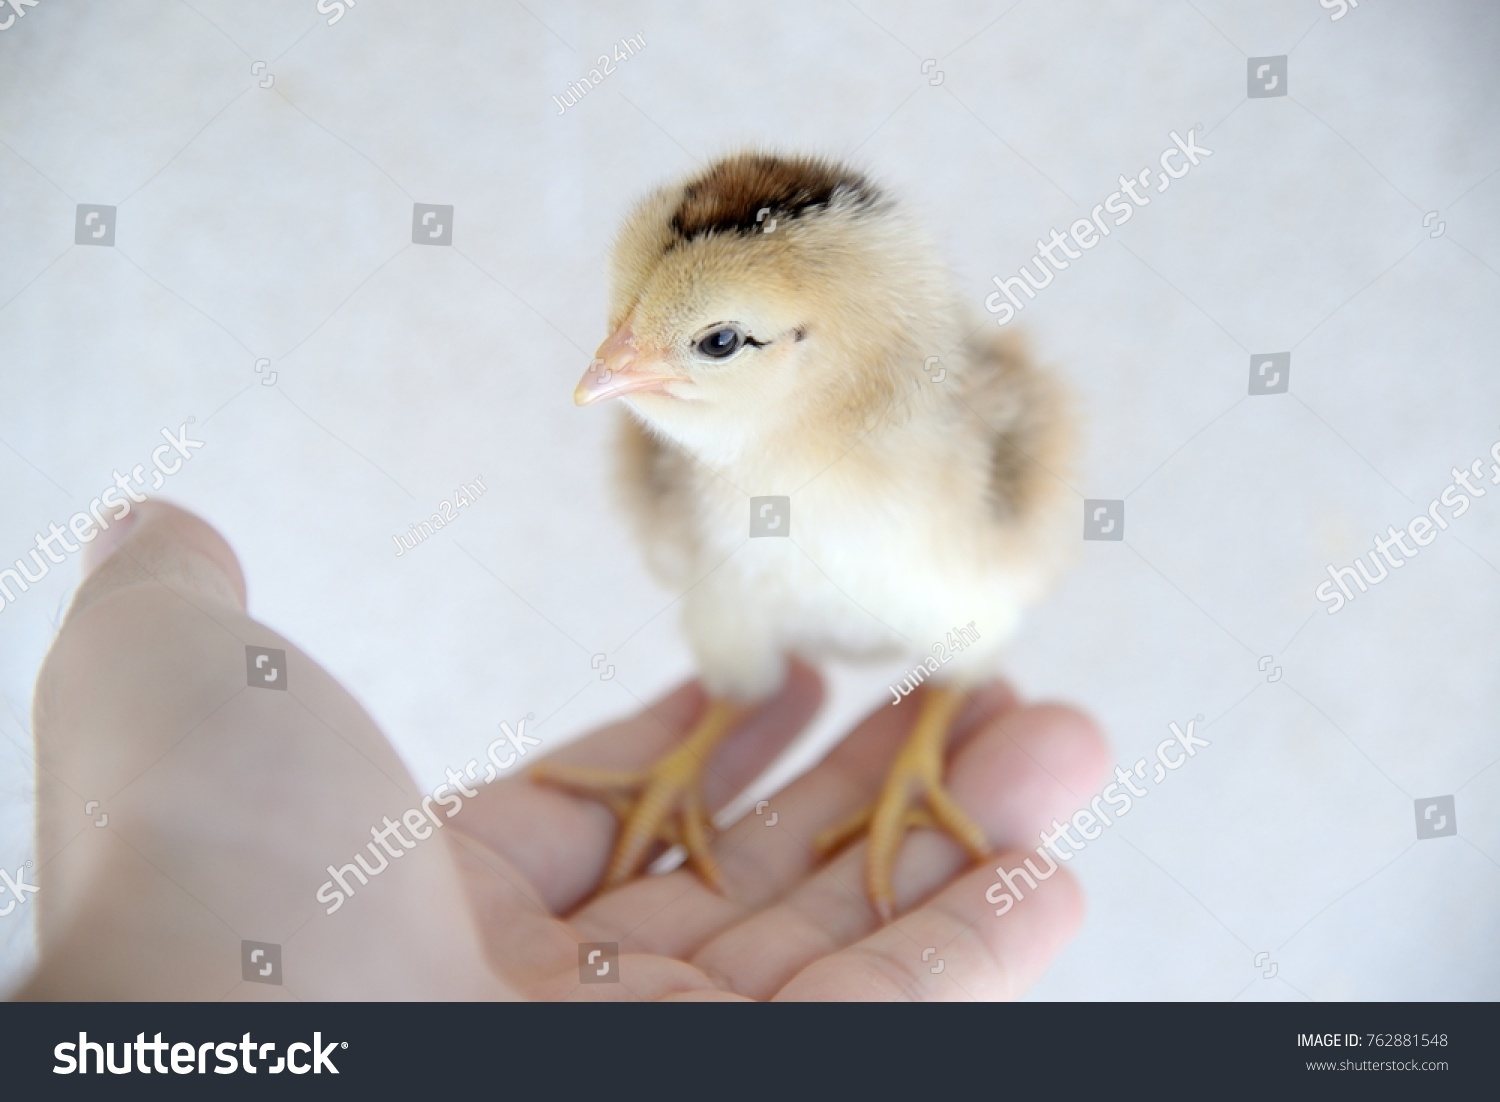 Brown chicks are in hand, crying and yearning for love from hens. On a white background #762881548